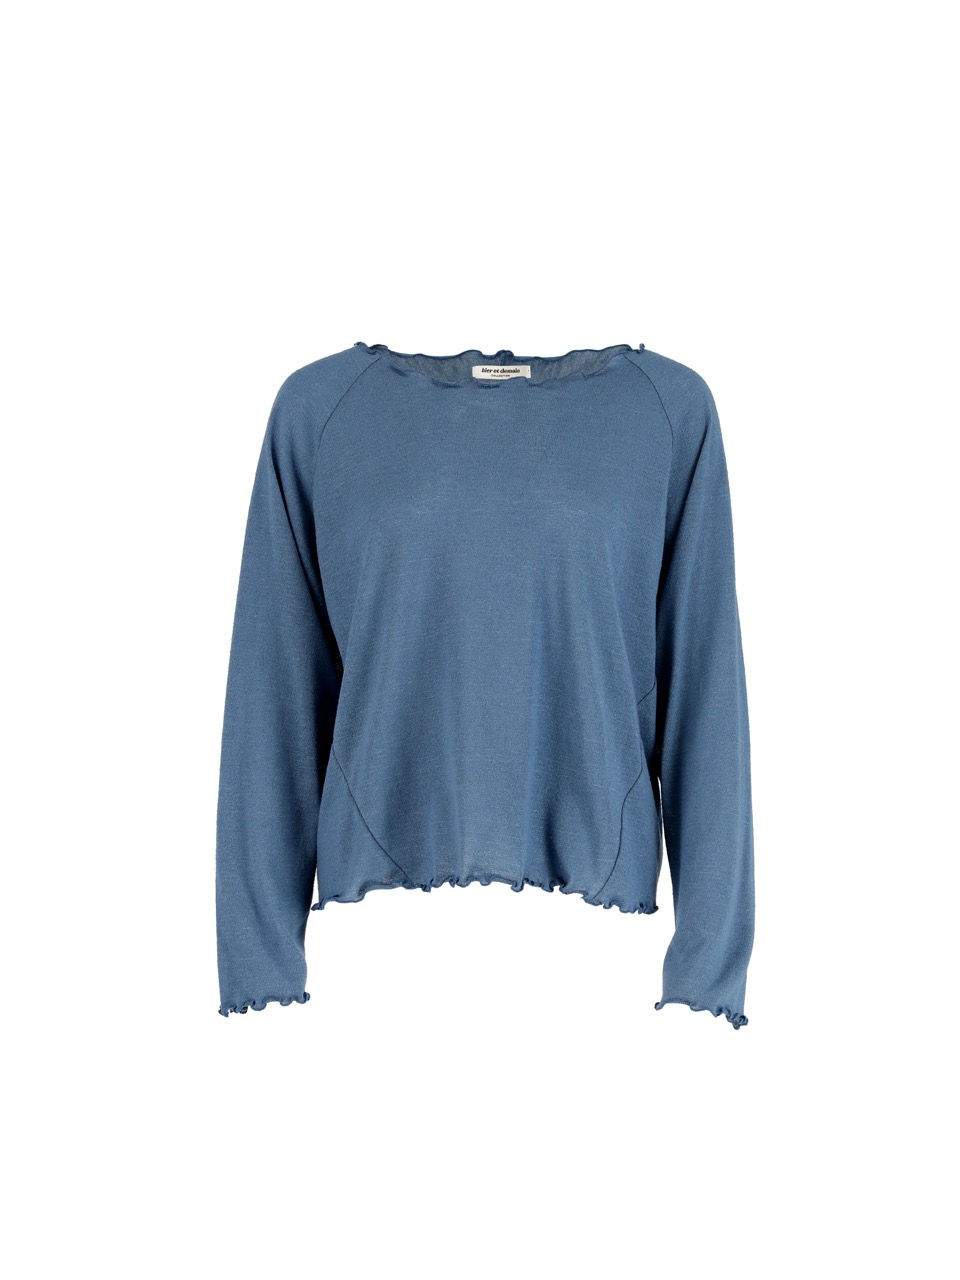 5P Boat neck Sleeve Knit top - Blue